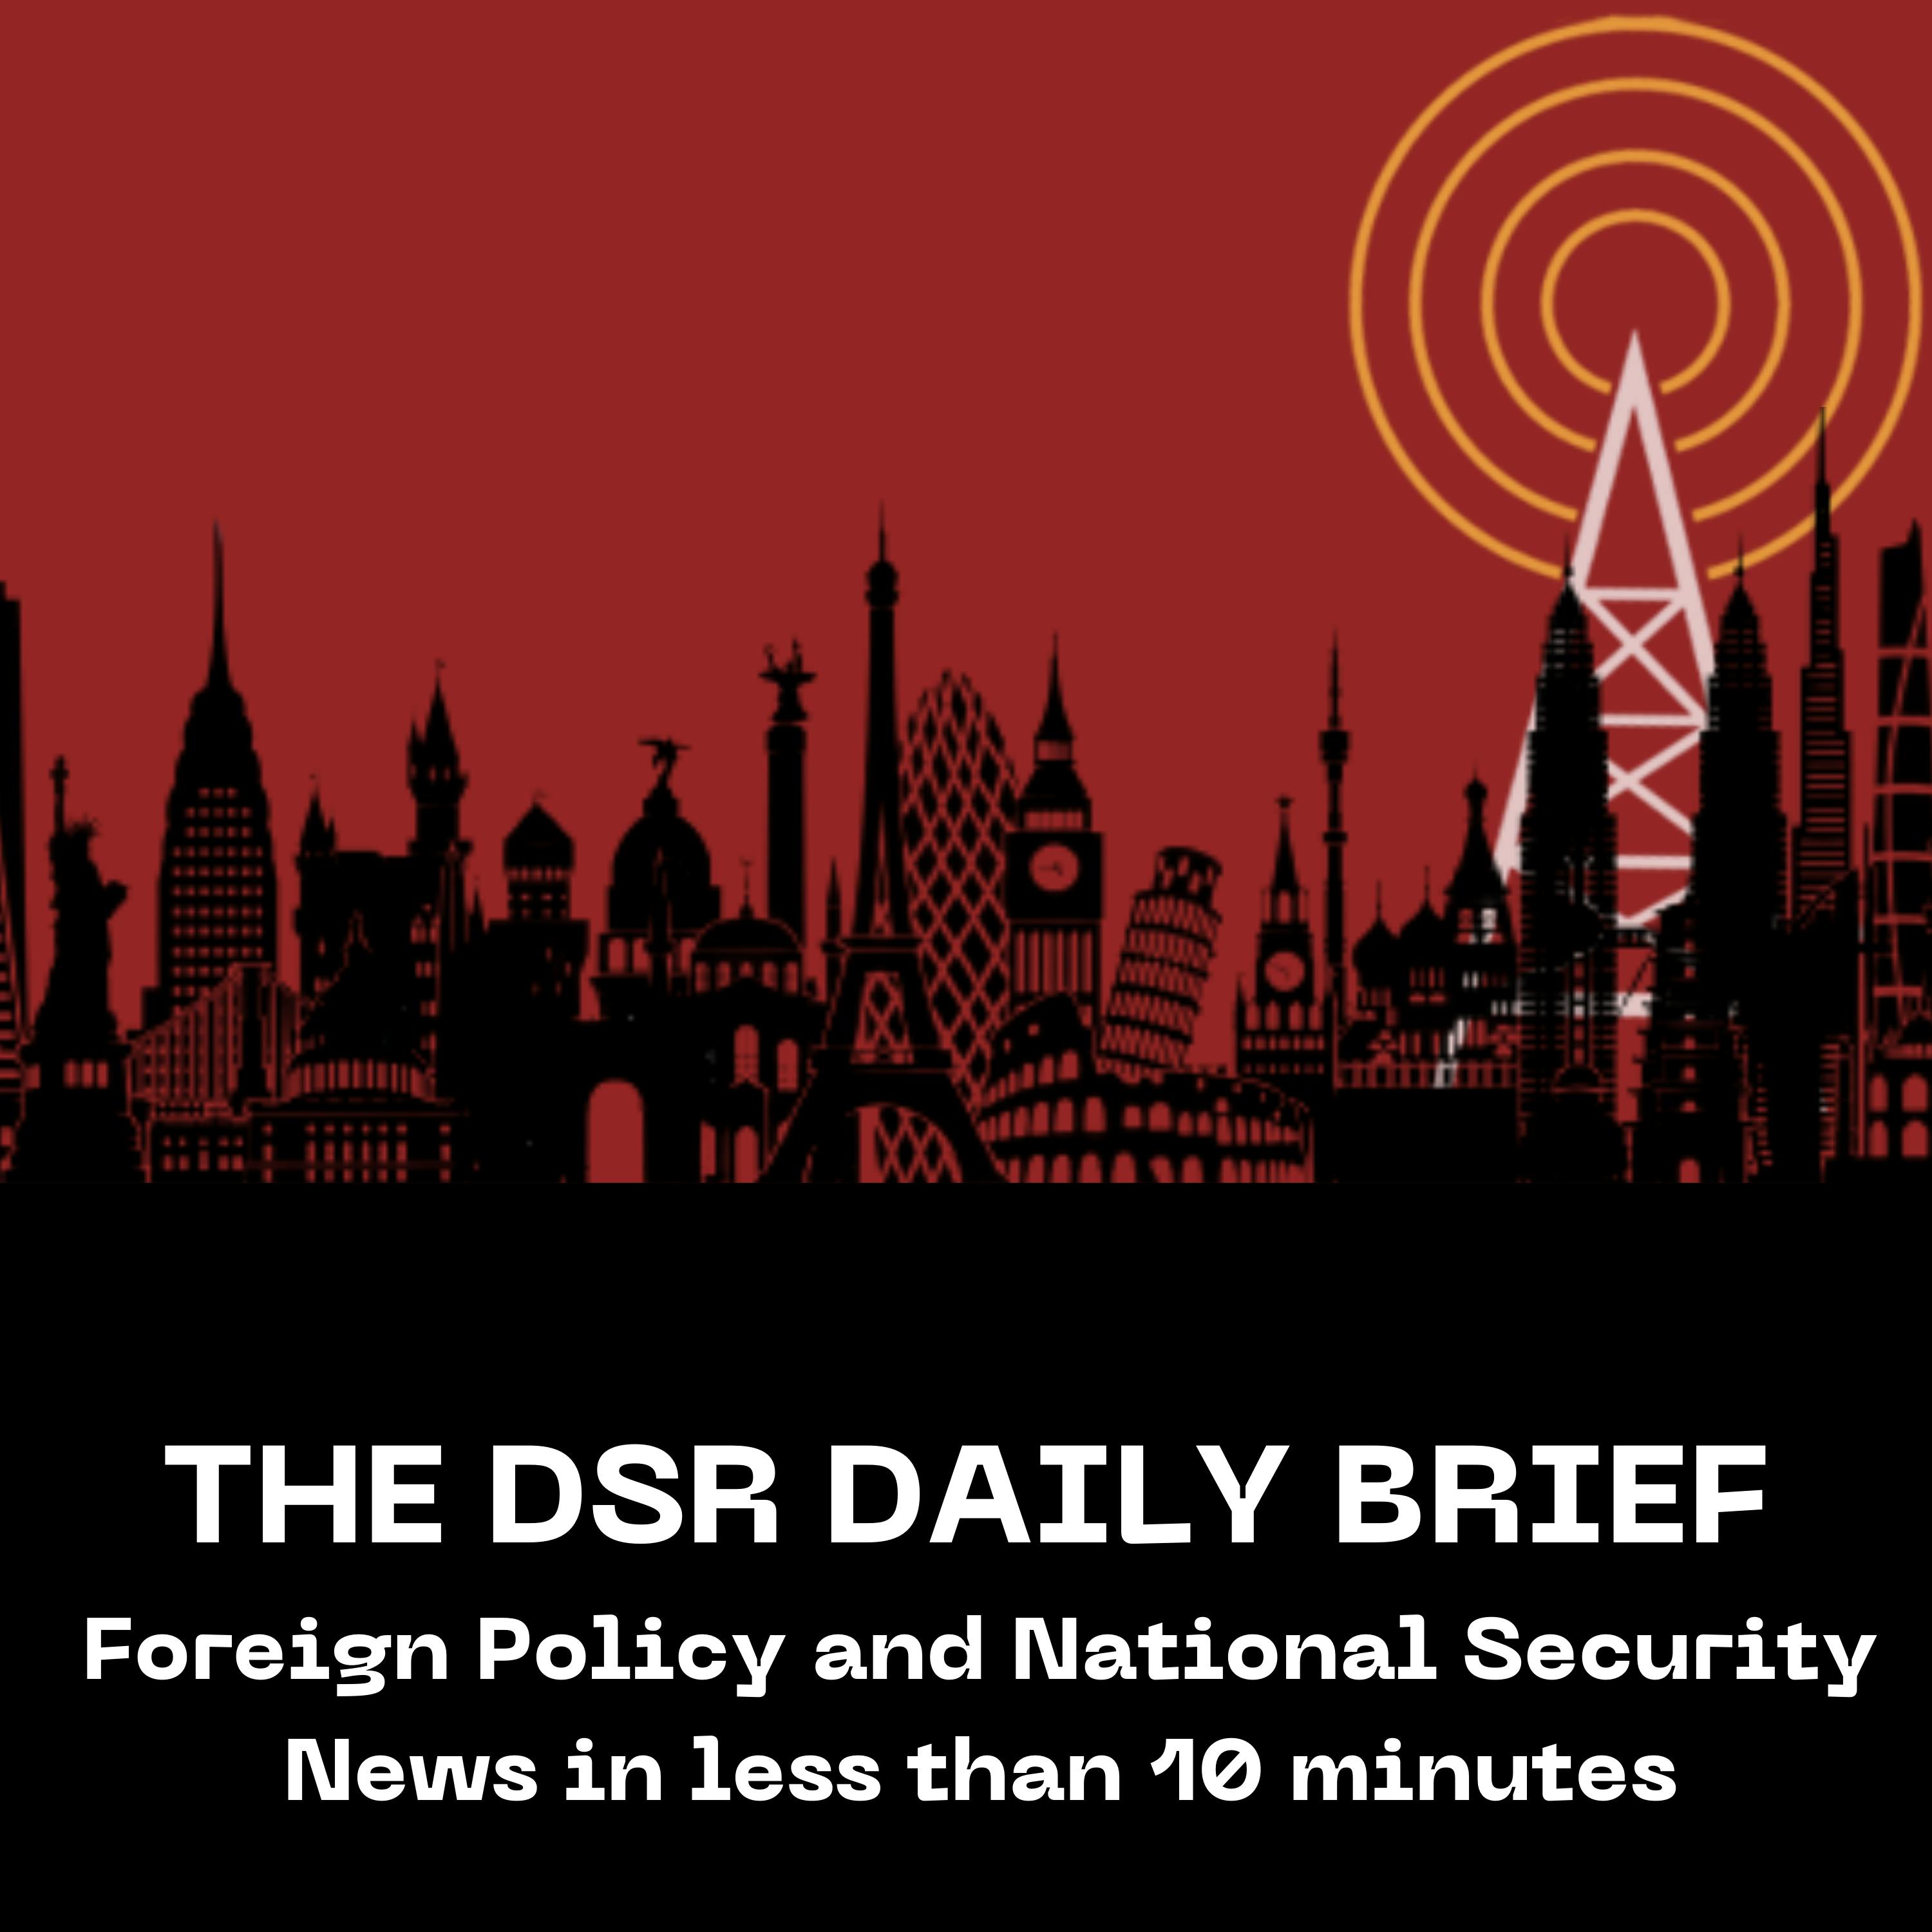 The DSR Daily Brief for September 21st: Poland to Stop Sending Weapons to Ukraine, India Suspends Visas for Canadians